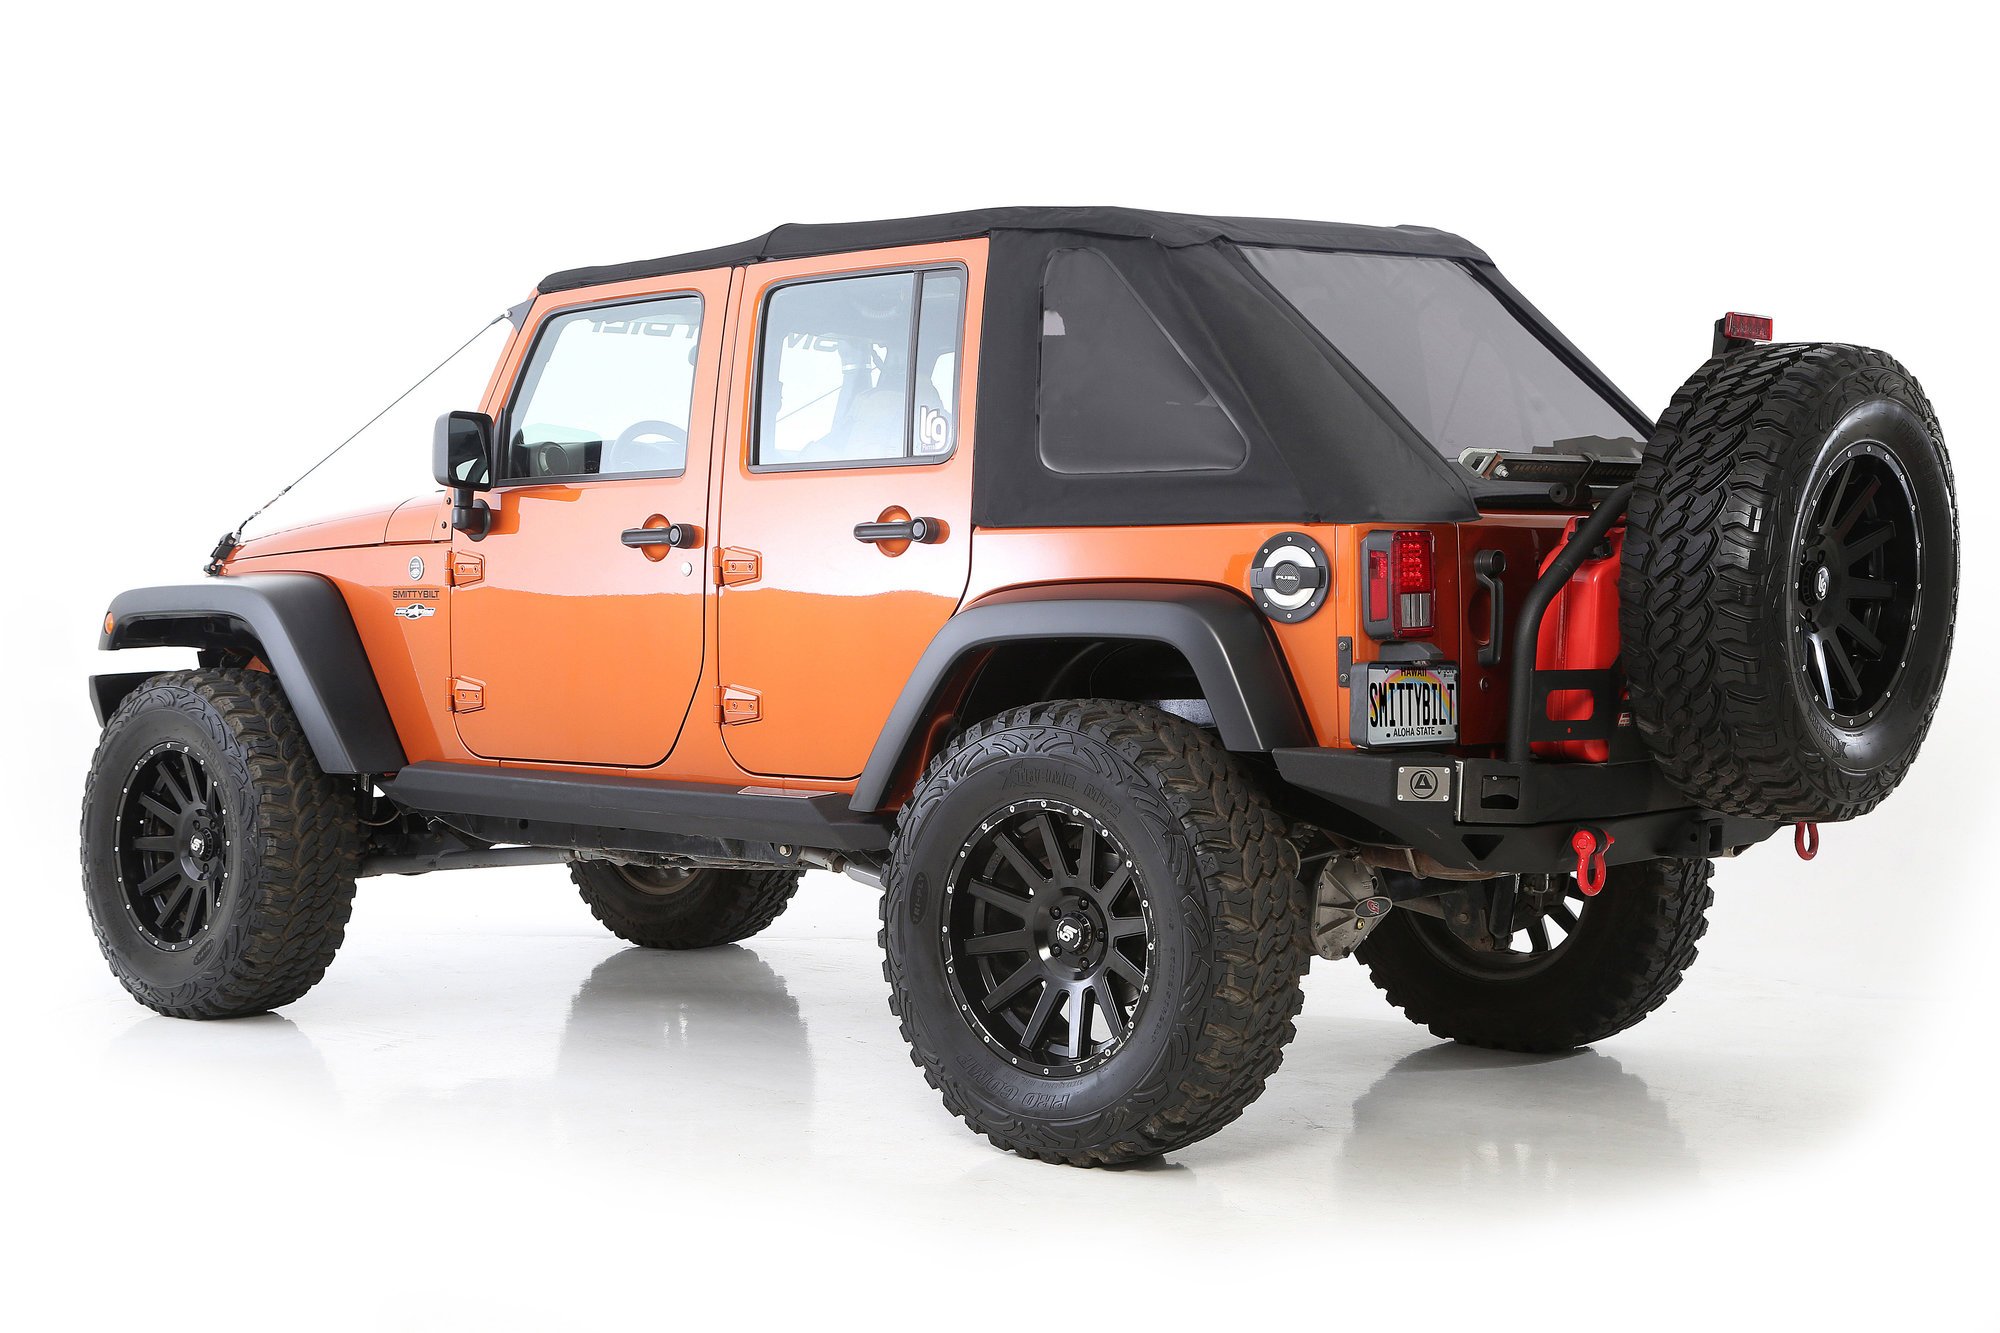 Smittybilt 9083235 Bowless Combo Soft Top for 07-18 Jeep Wrangler Unlimited  JK | Quadratec